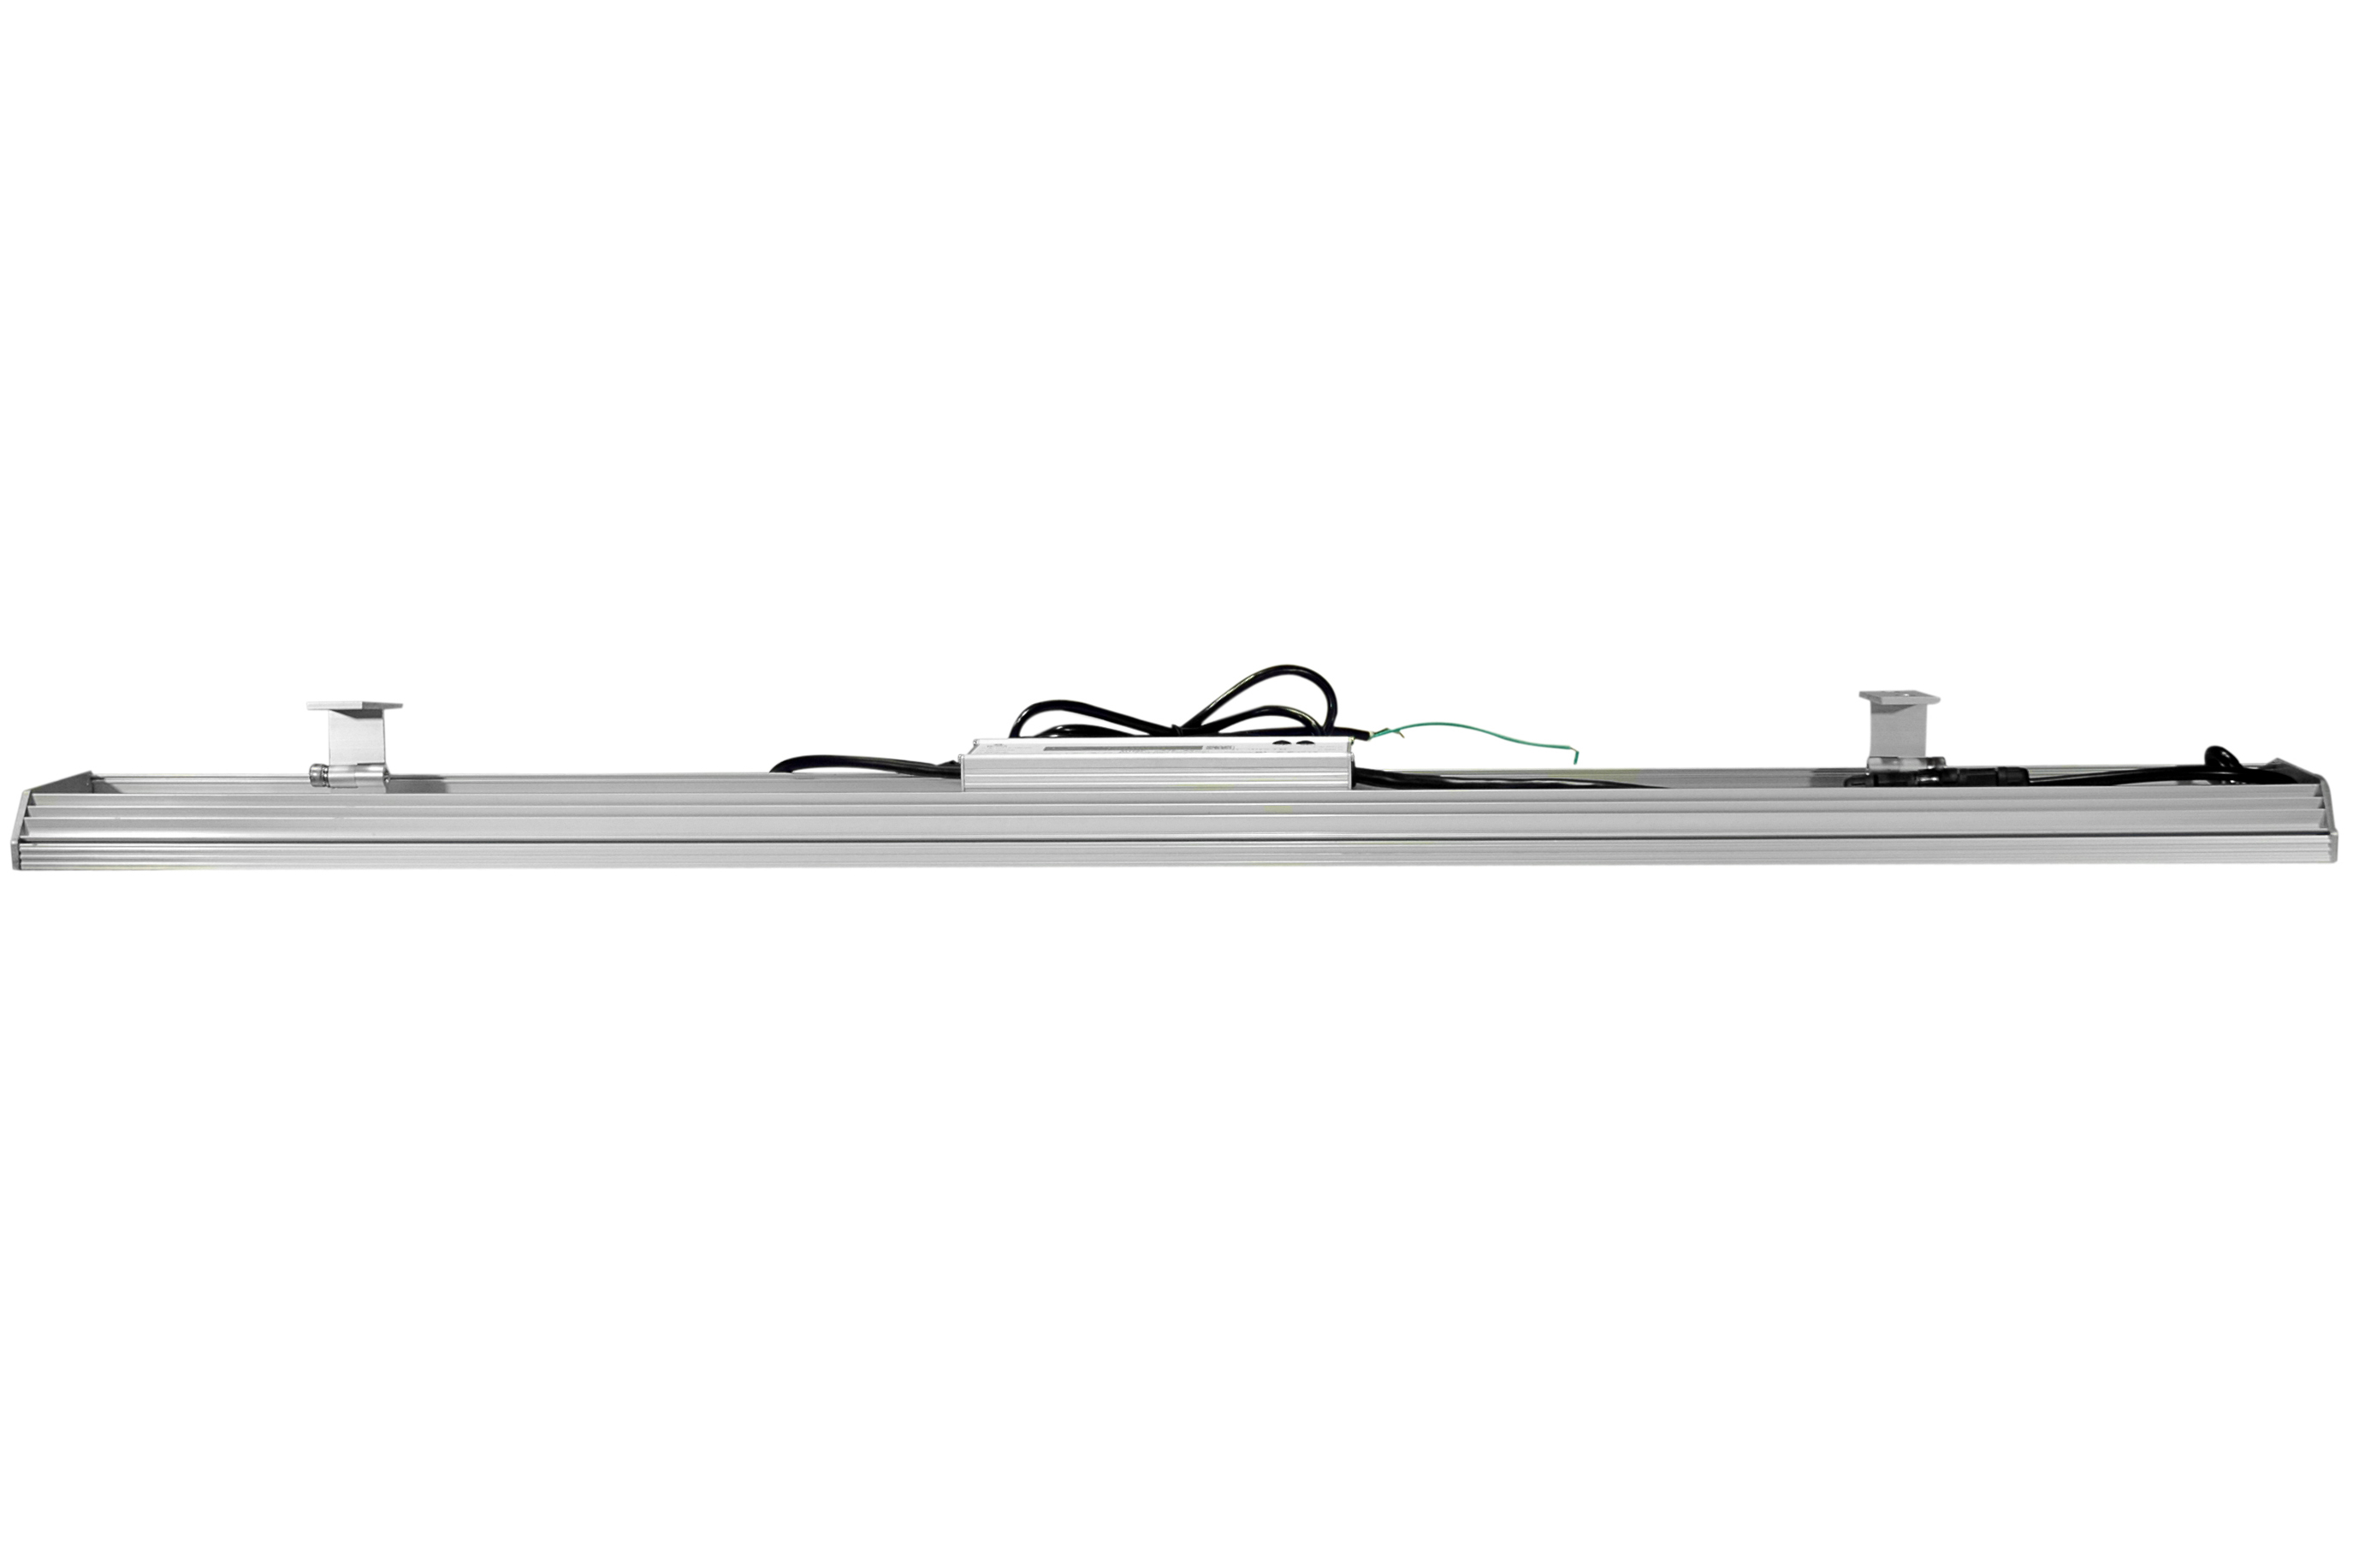 General Area Use High Bay 160 Watt LED Light Fixture that Operates on 48 Volts DC